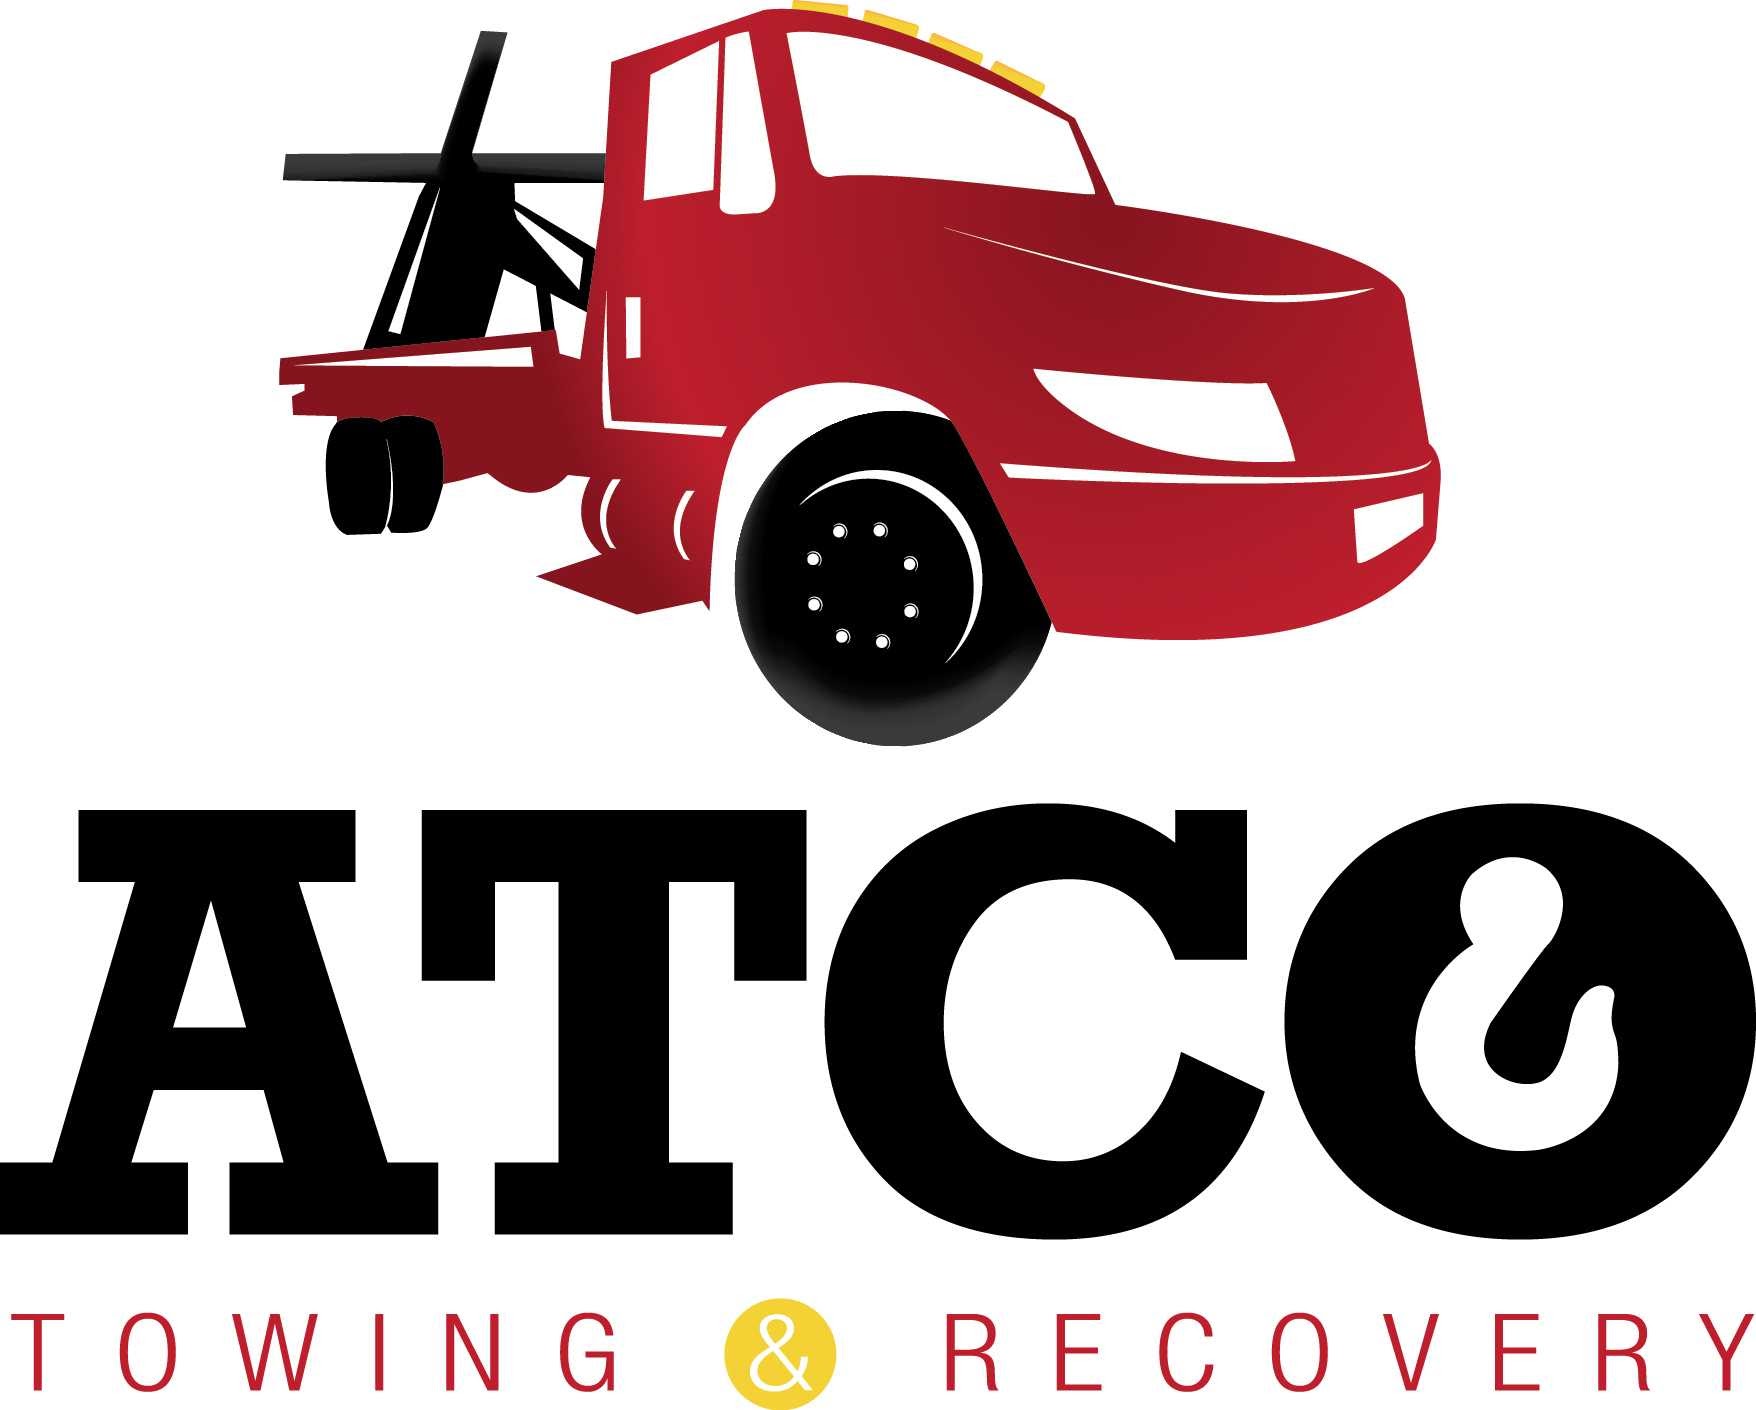 Atco Towing & Recovery